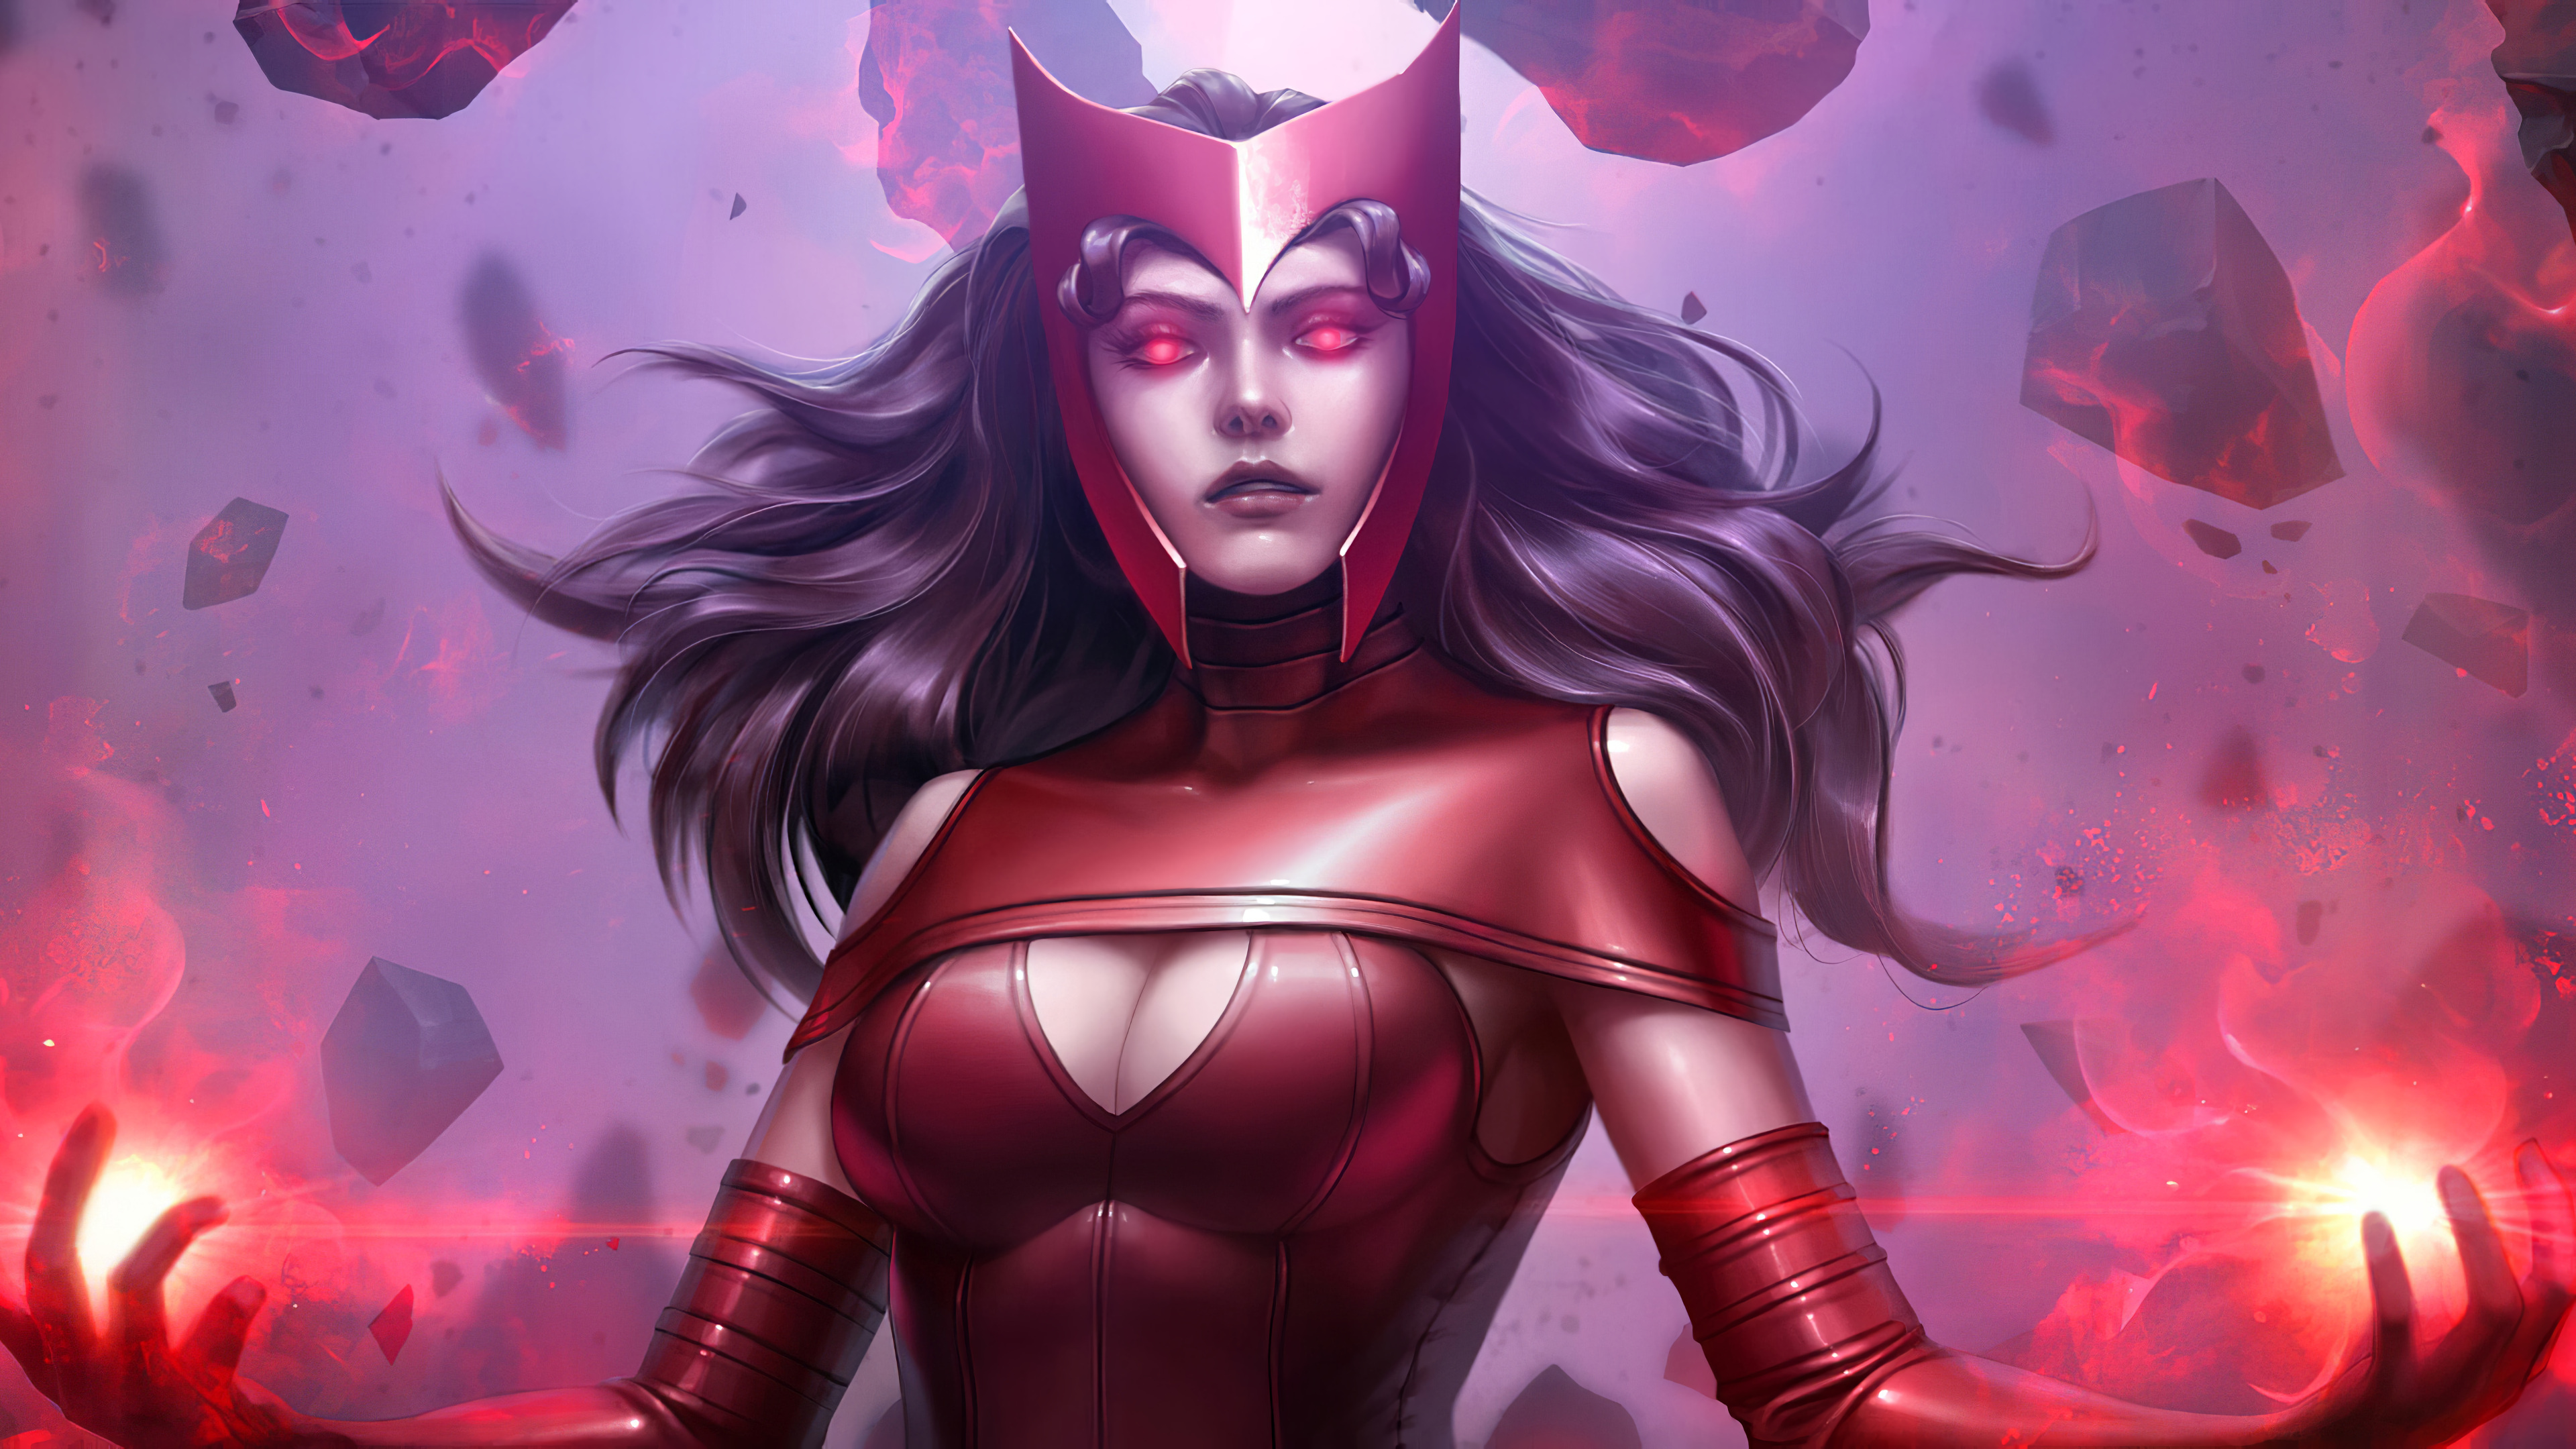 Scarlet Witch, Scarlet Witch cartoon wallpapers, Animated Scarlet Witch, Comic book style, 3840x2160 4K Desktop